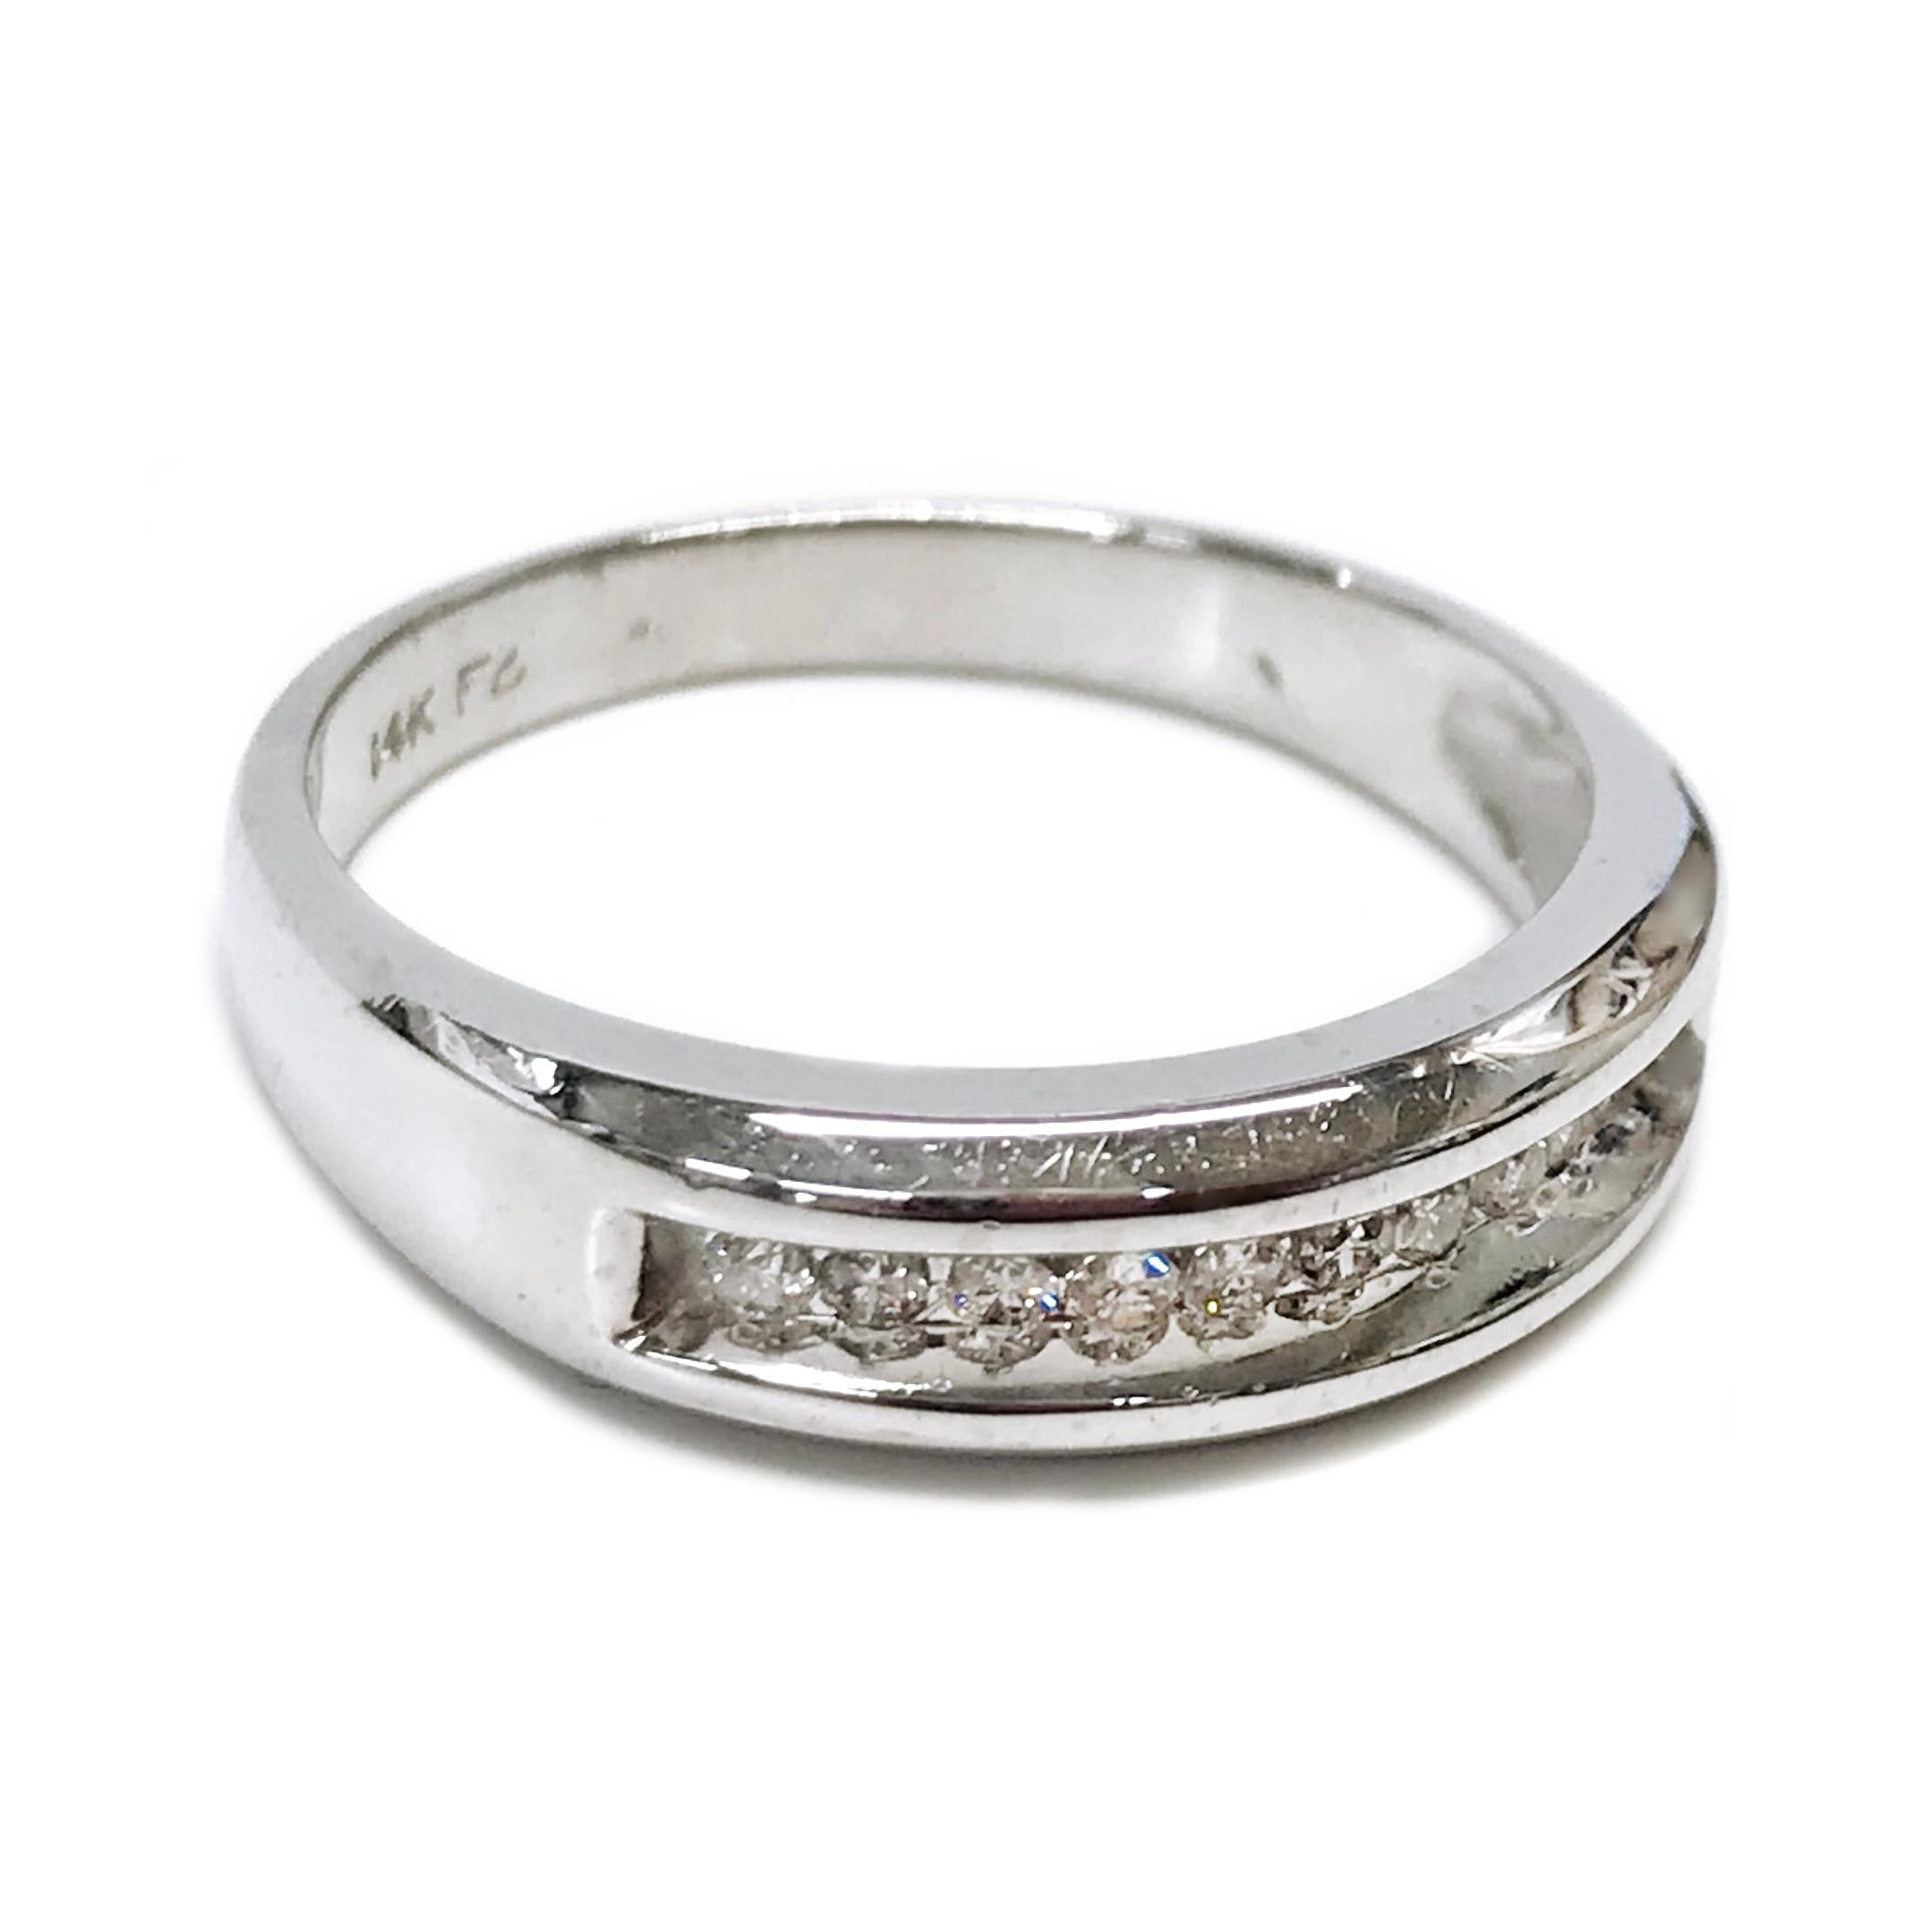 Gentleman’s 14 Karat White Gold Channel-Set Diamond Ring. The ring has a smooth shiny finish with eleven 2mm round diamonds channel-set with a total weight of 0.33ctw. Stamped on the inside of the band are 14K and the FG maker's mark. The ring size